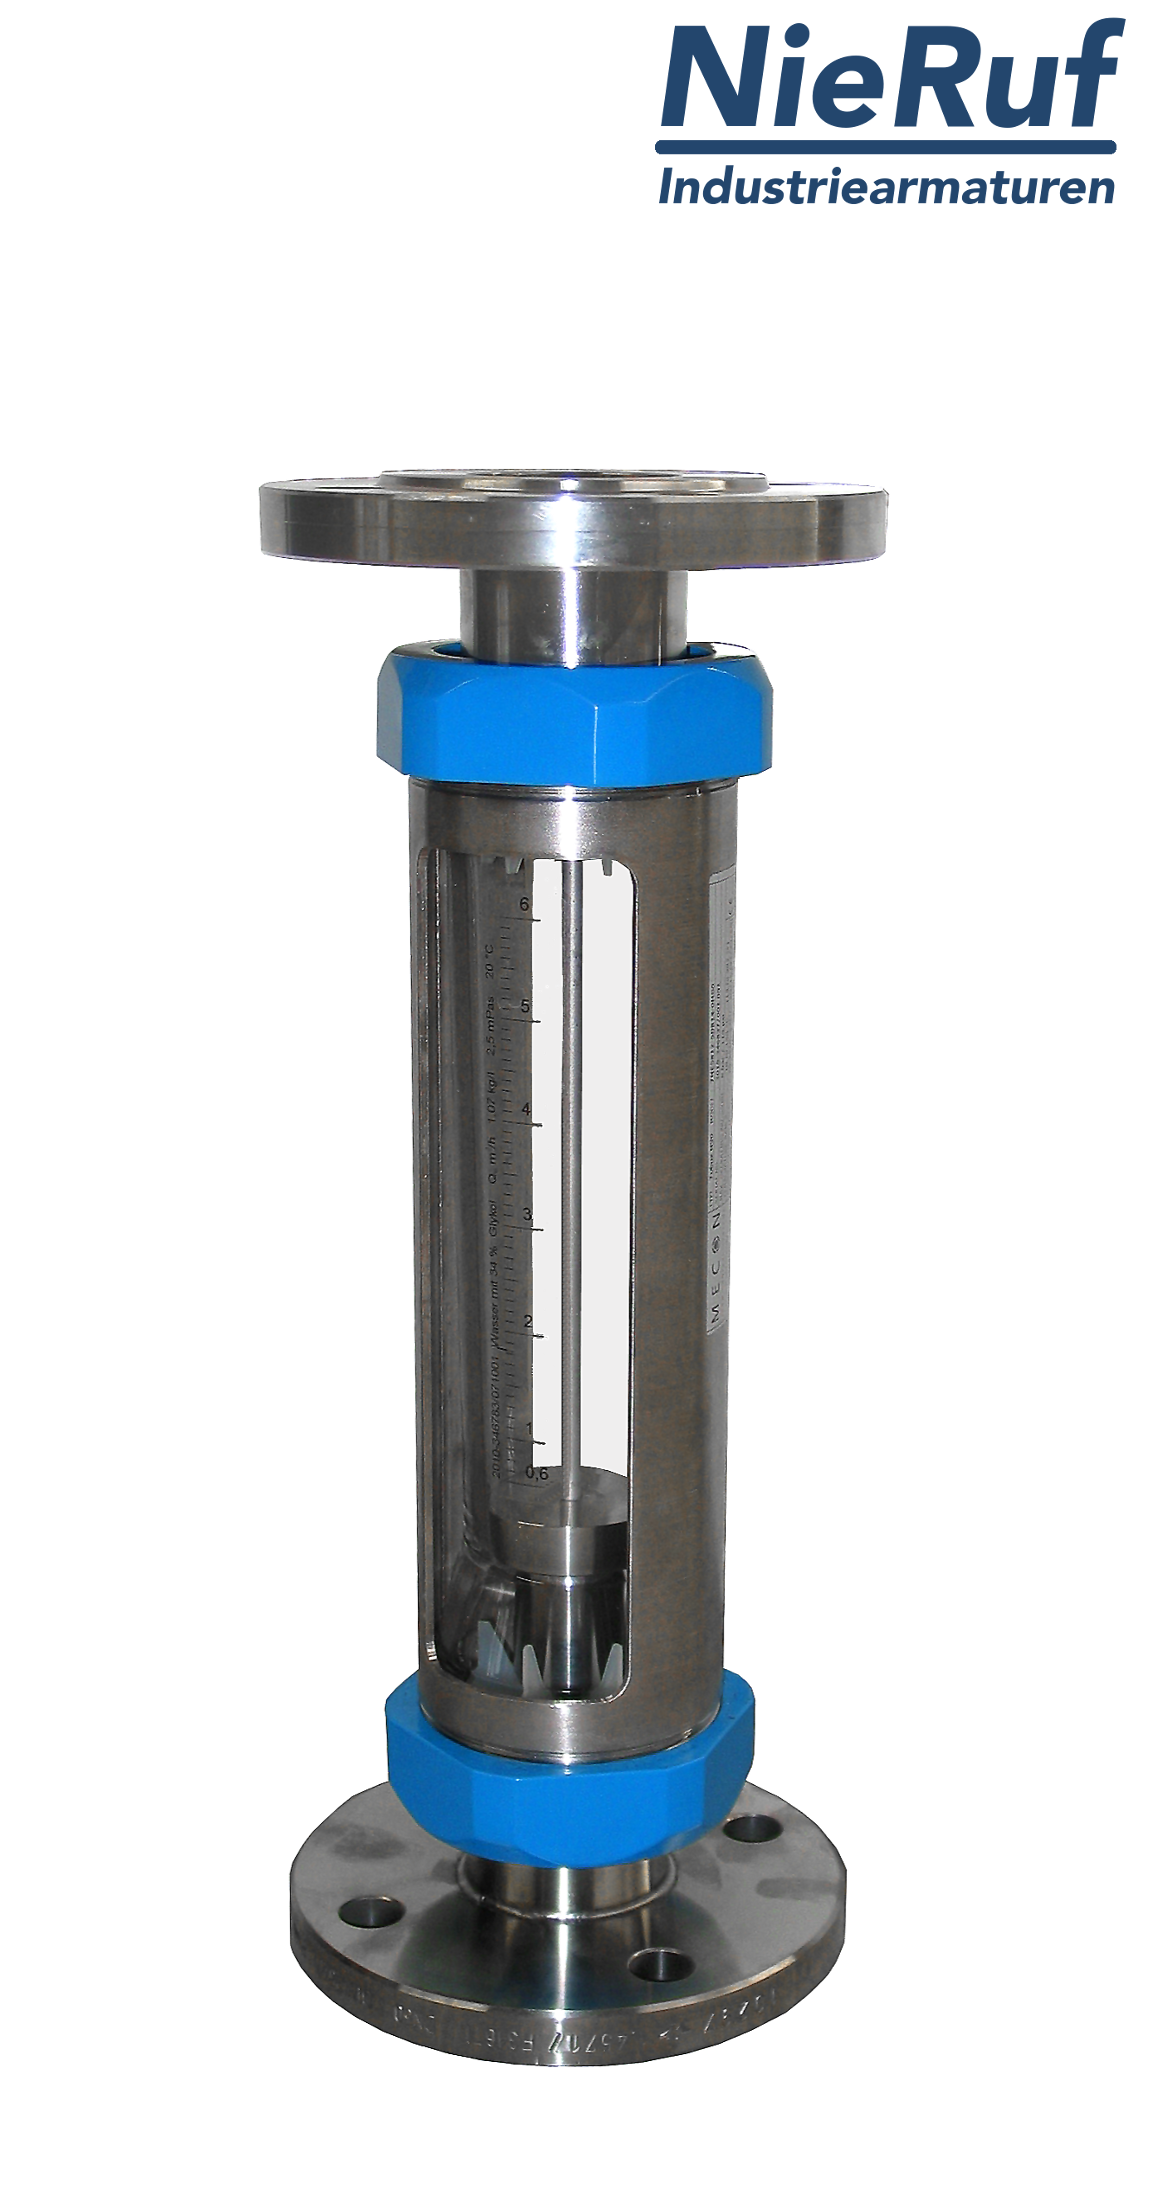 Variable area flowmeter stainless steel + borosilicate flange DN50 80.0 - 800 l/h water FKM